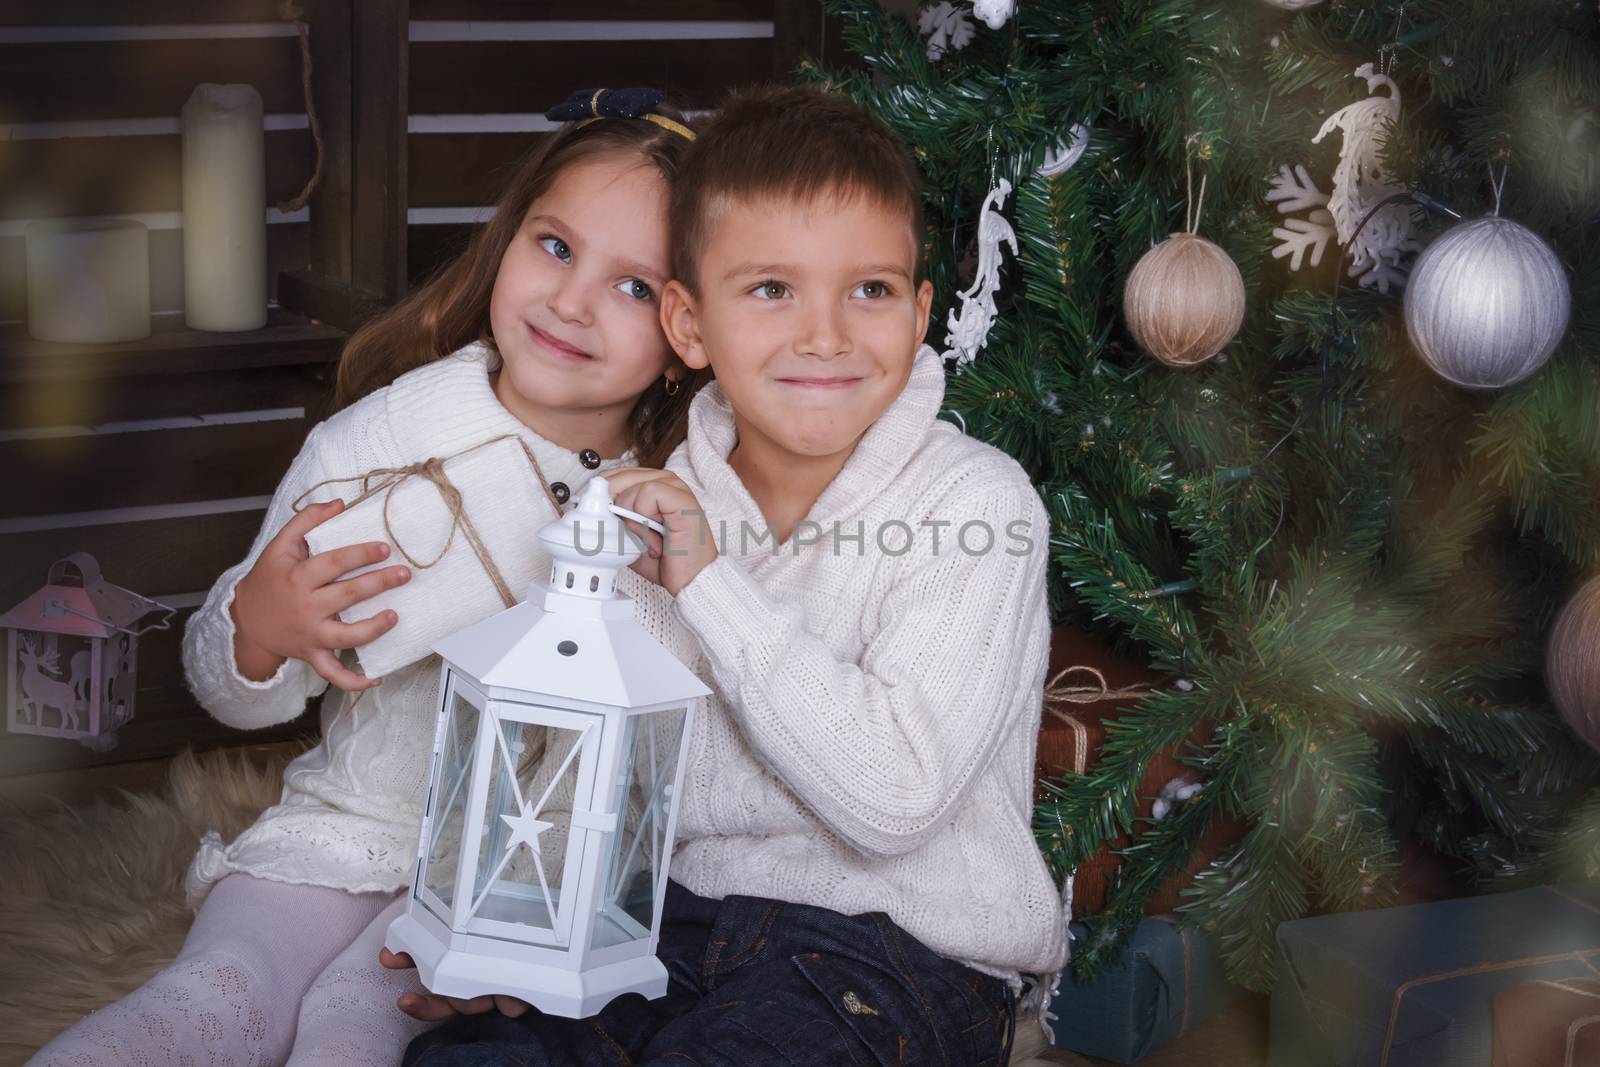 Sister and brother sitting under Christmas tree with gift and lamp